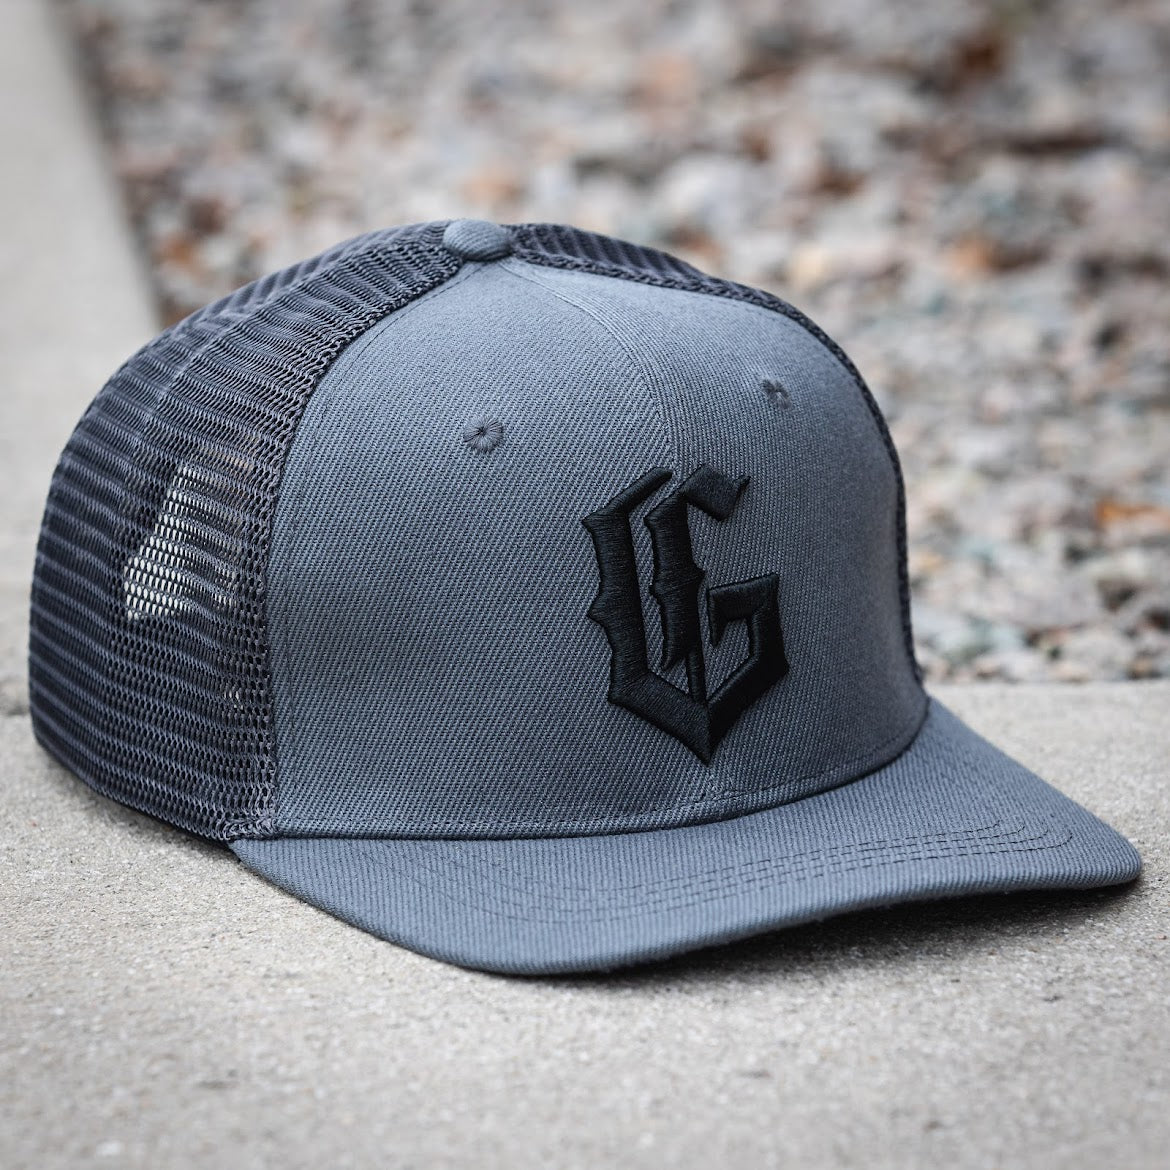 The Grind Athletics Gray & Gray Mesh 3D Classic Snapback Hat